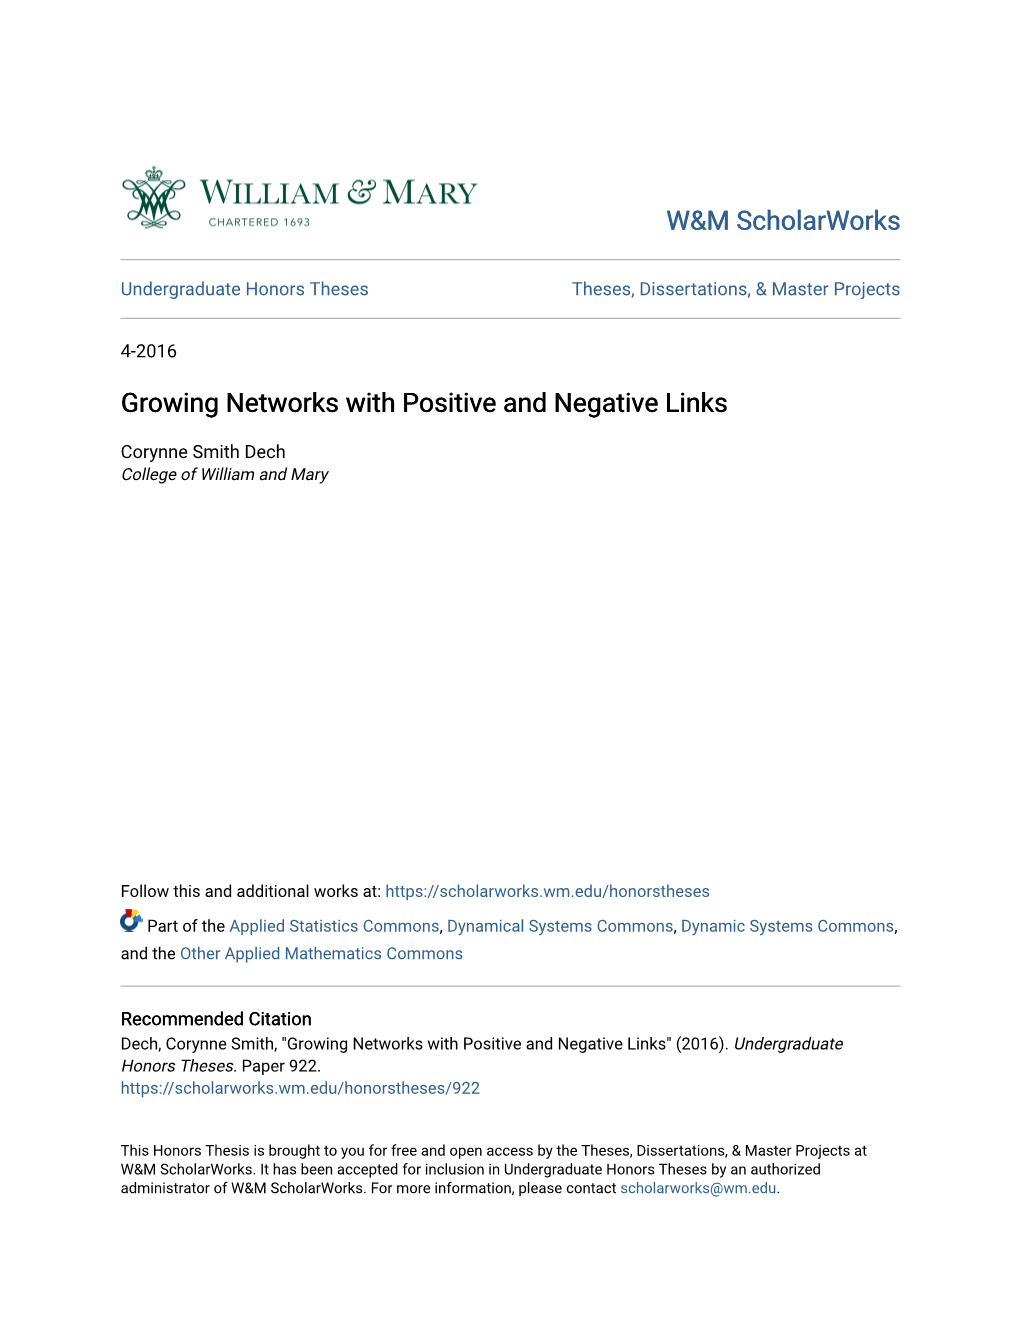 Growing Networks with Positive and Negative Links